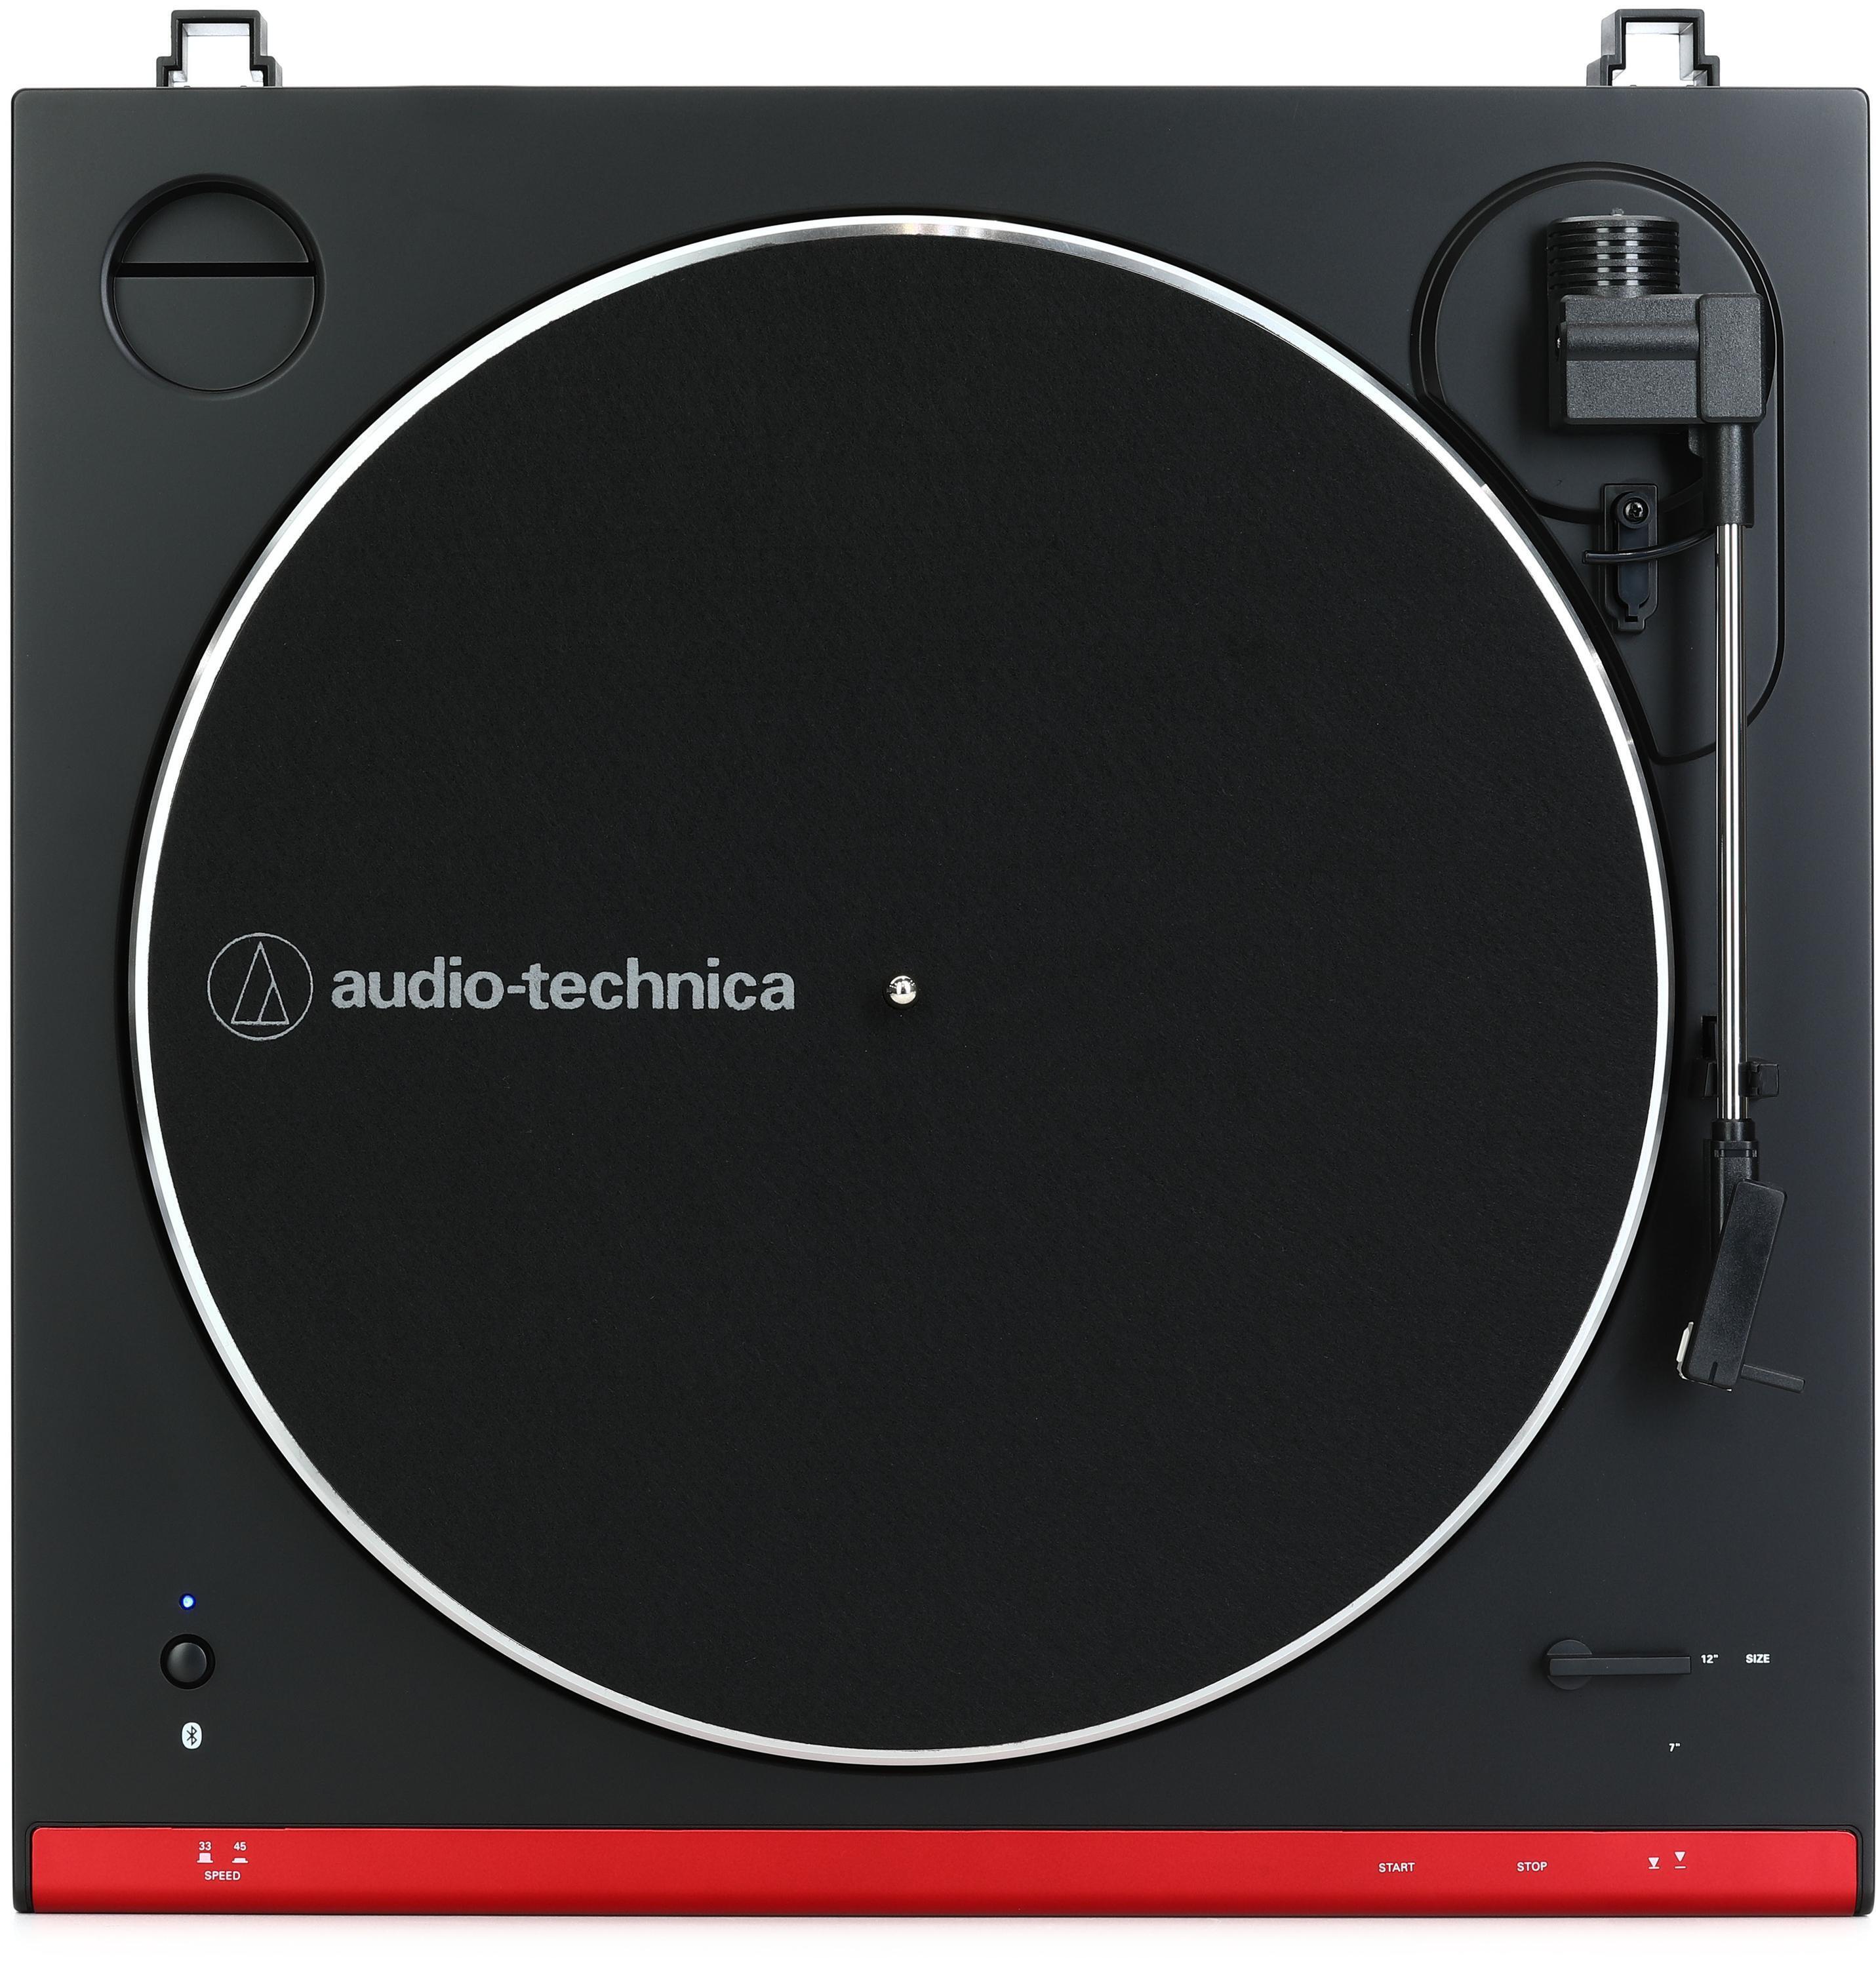 Bundled Item: Audio-Technica AT-LP60XBT Wireless Belt-Drive Turntable with Bluetooth - Red